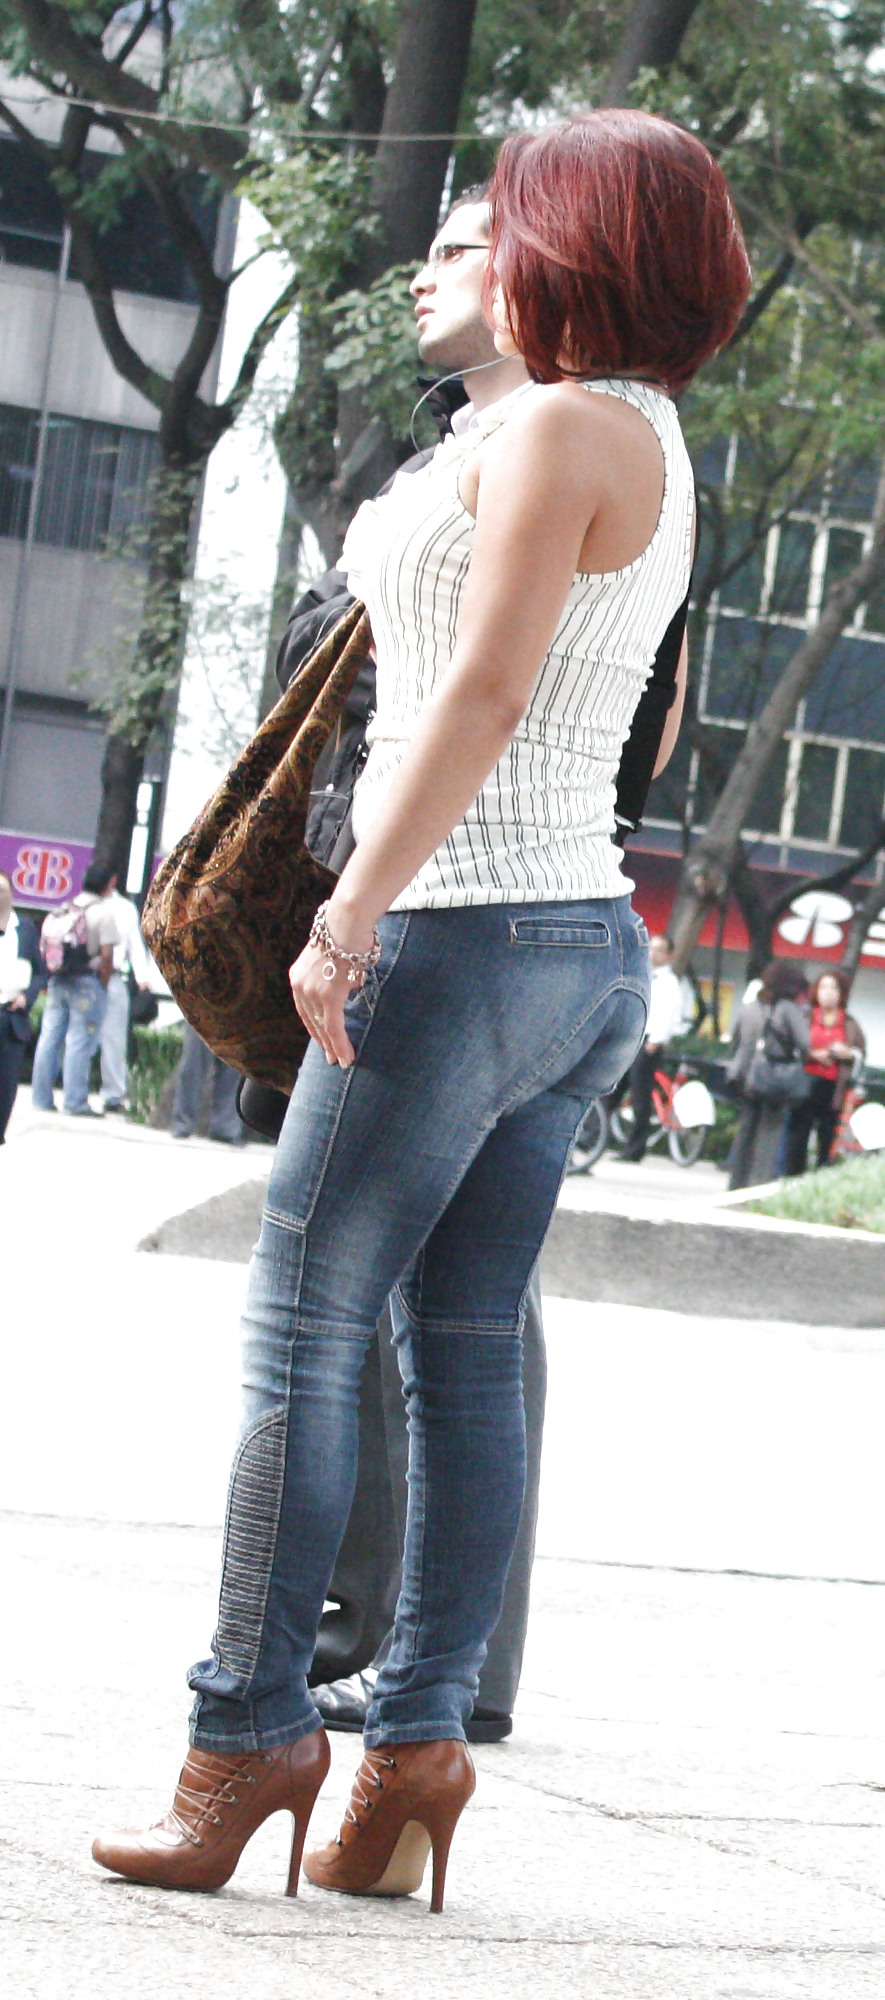 Milf in thight jeans #19832373